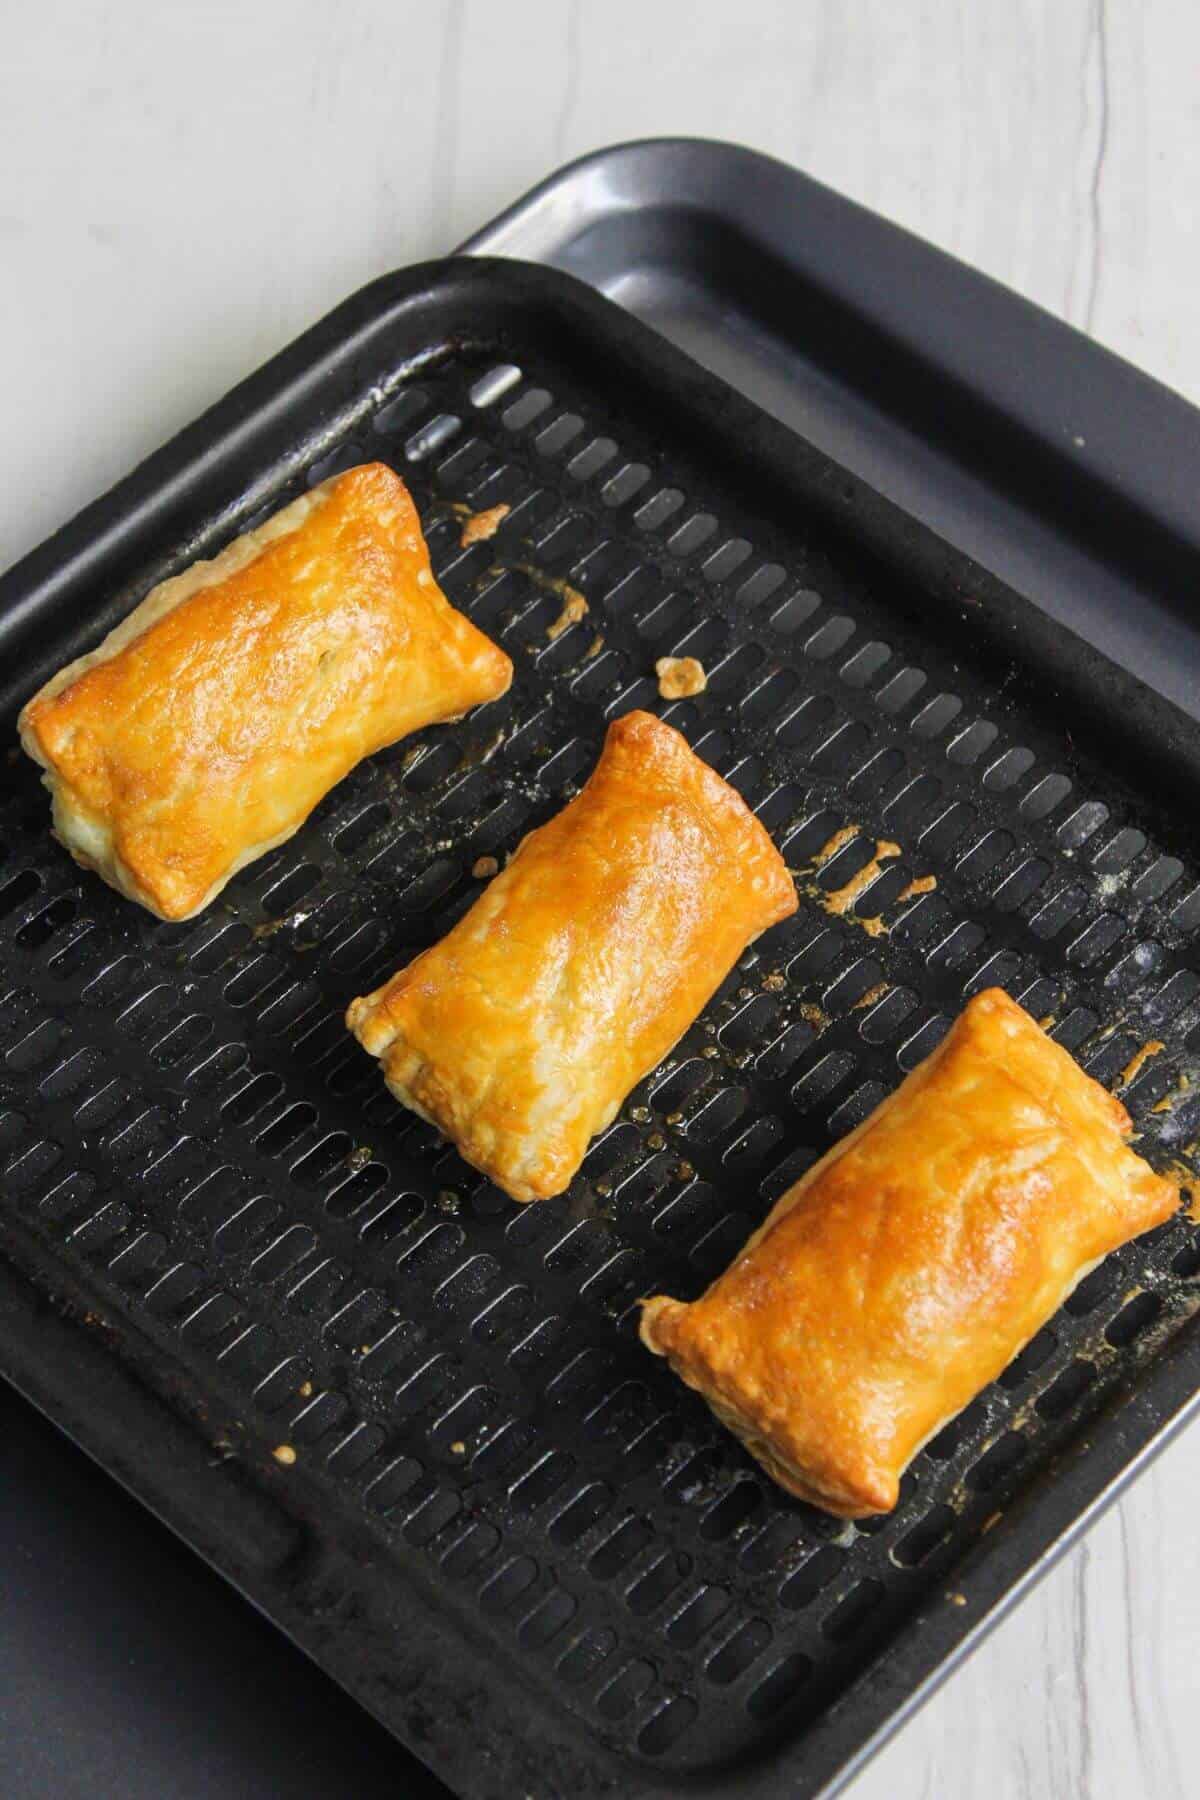 Three golden-brown pastry rolls on a black baking tray.